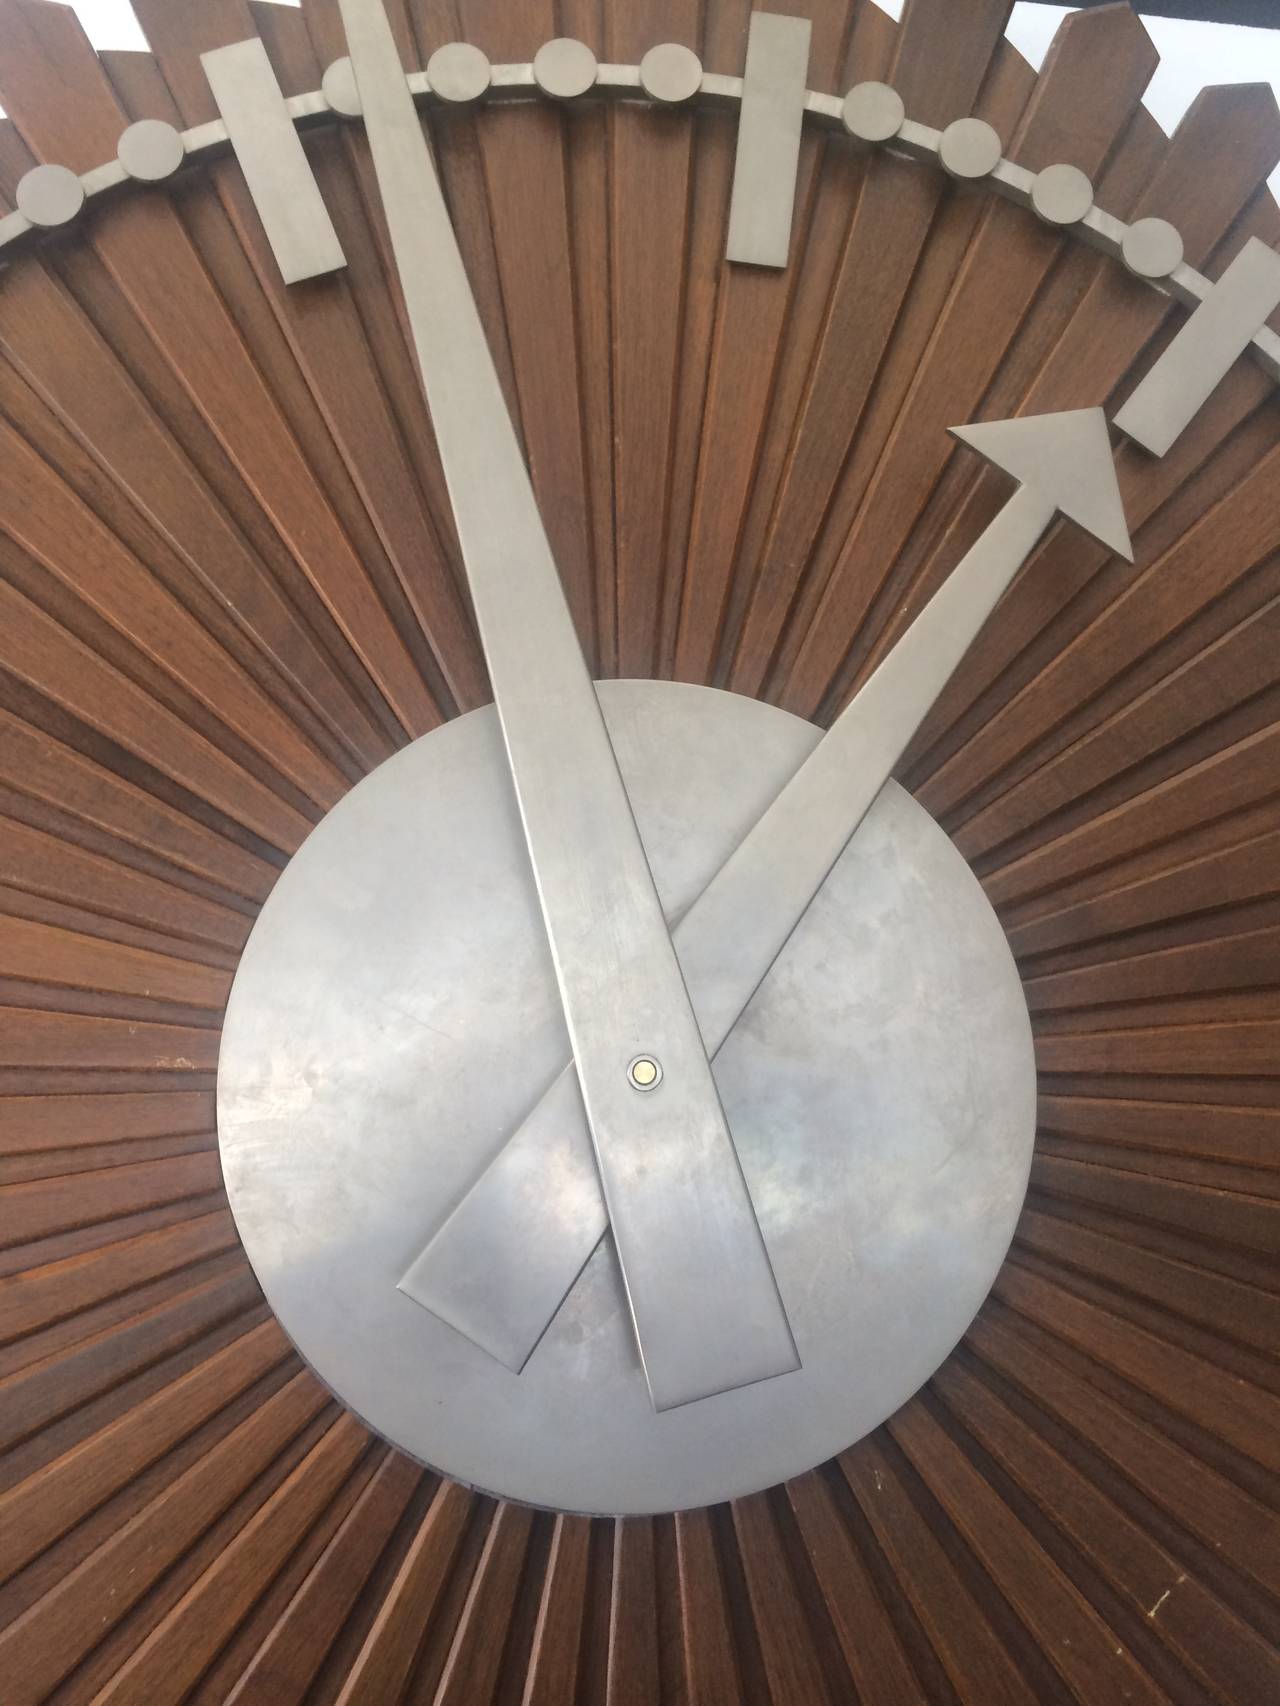 Extraordinary 1940s wall clock, beautiful combination of wood and aluminum.  Clock is electric. Provenance bank in Chicago.